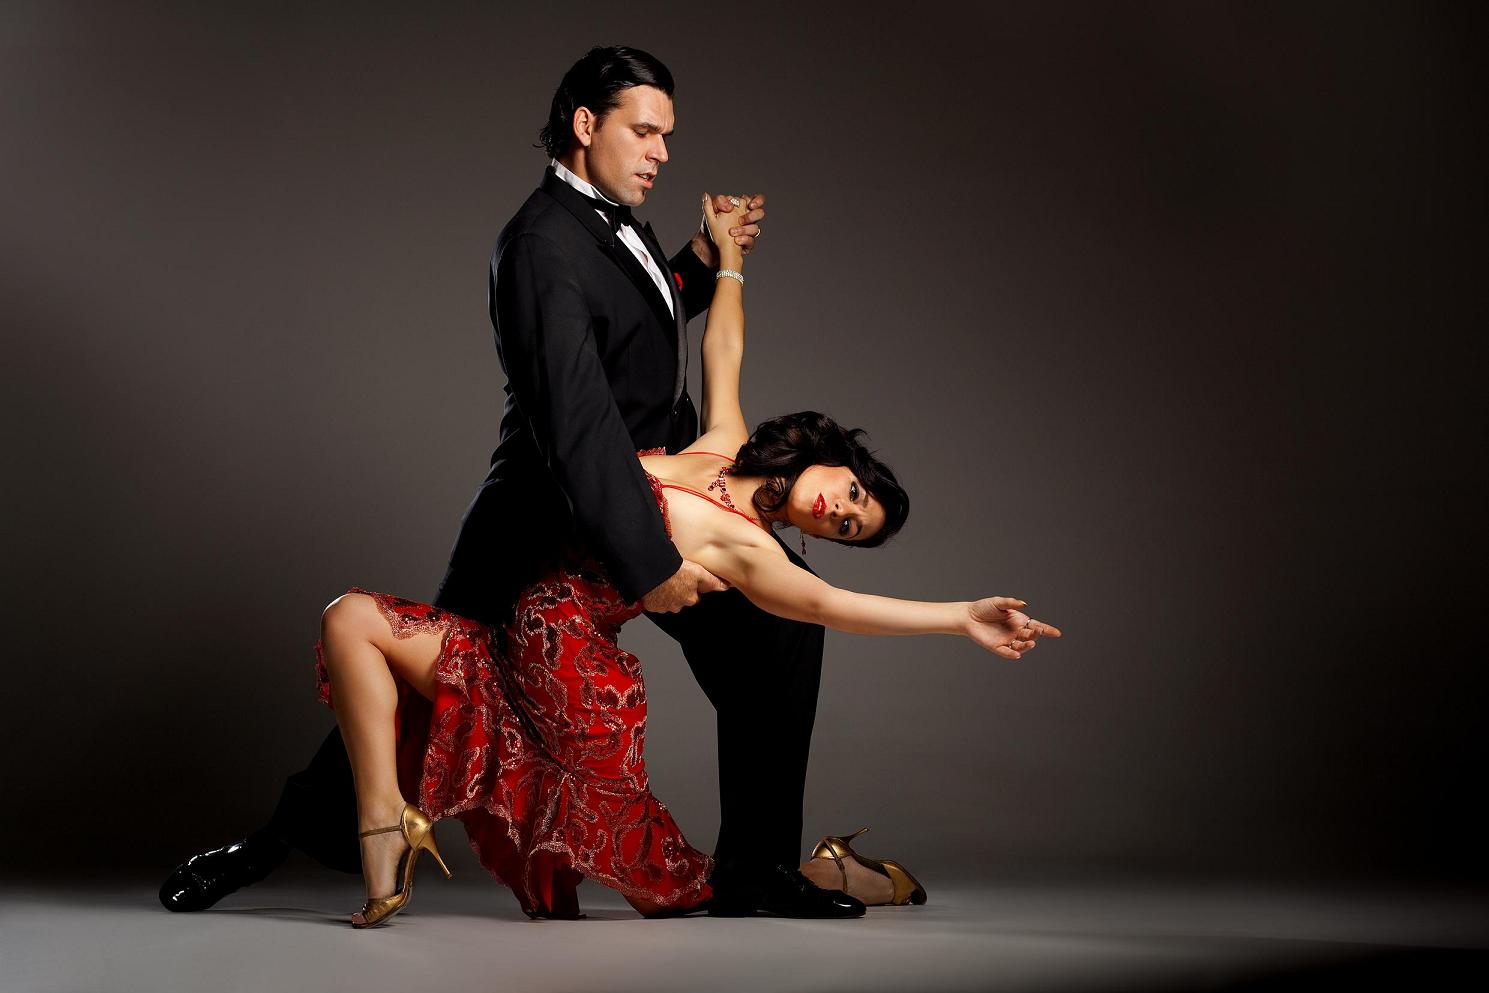 How Tango Changed Me Both on a Professional and Personal Level